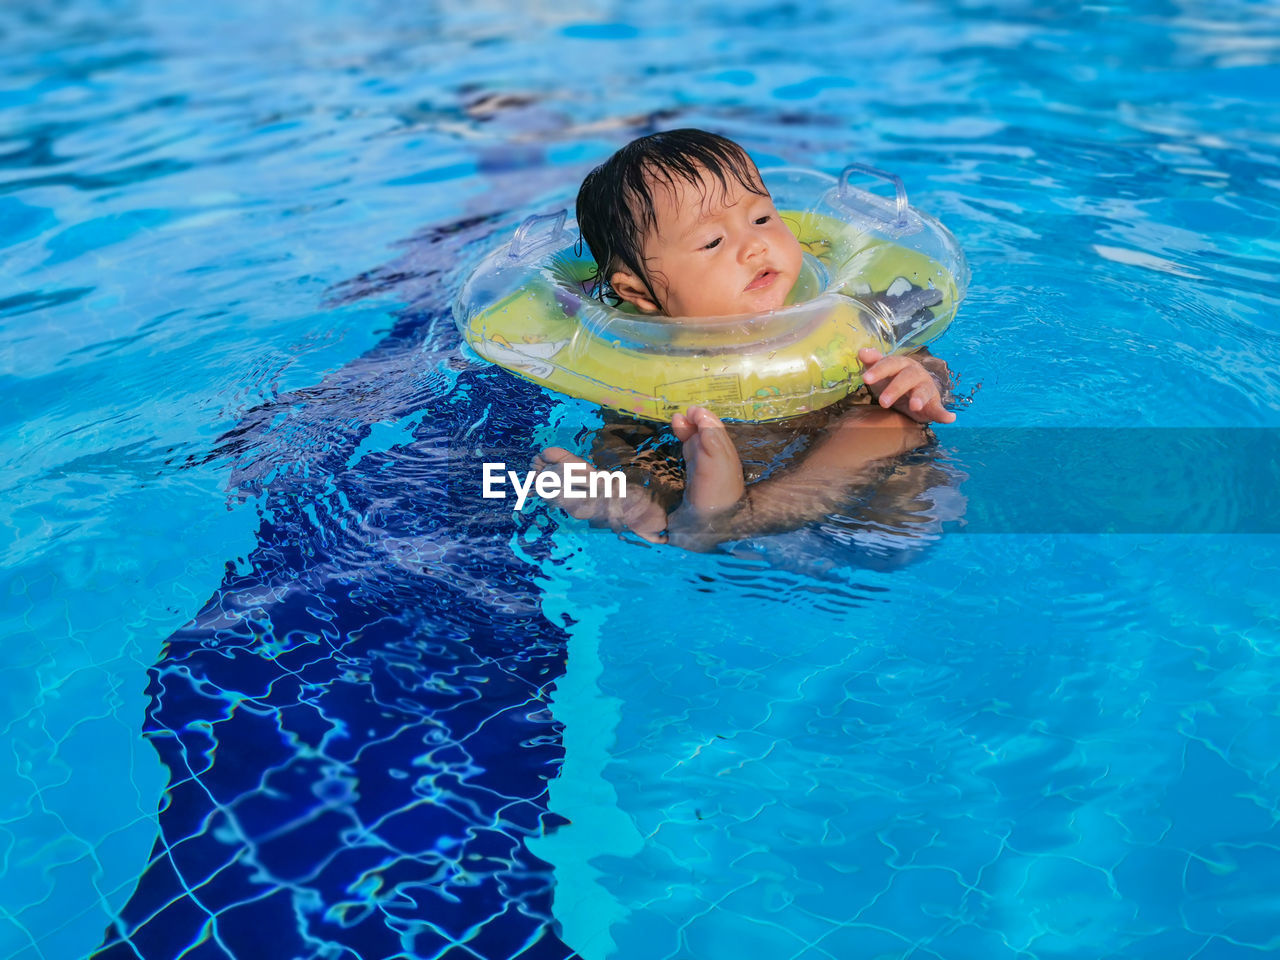 Baby learns to swim with extra swimming ring for babies